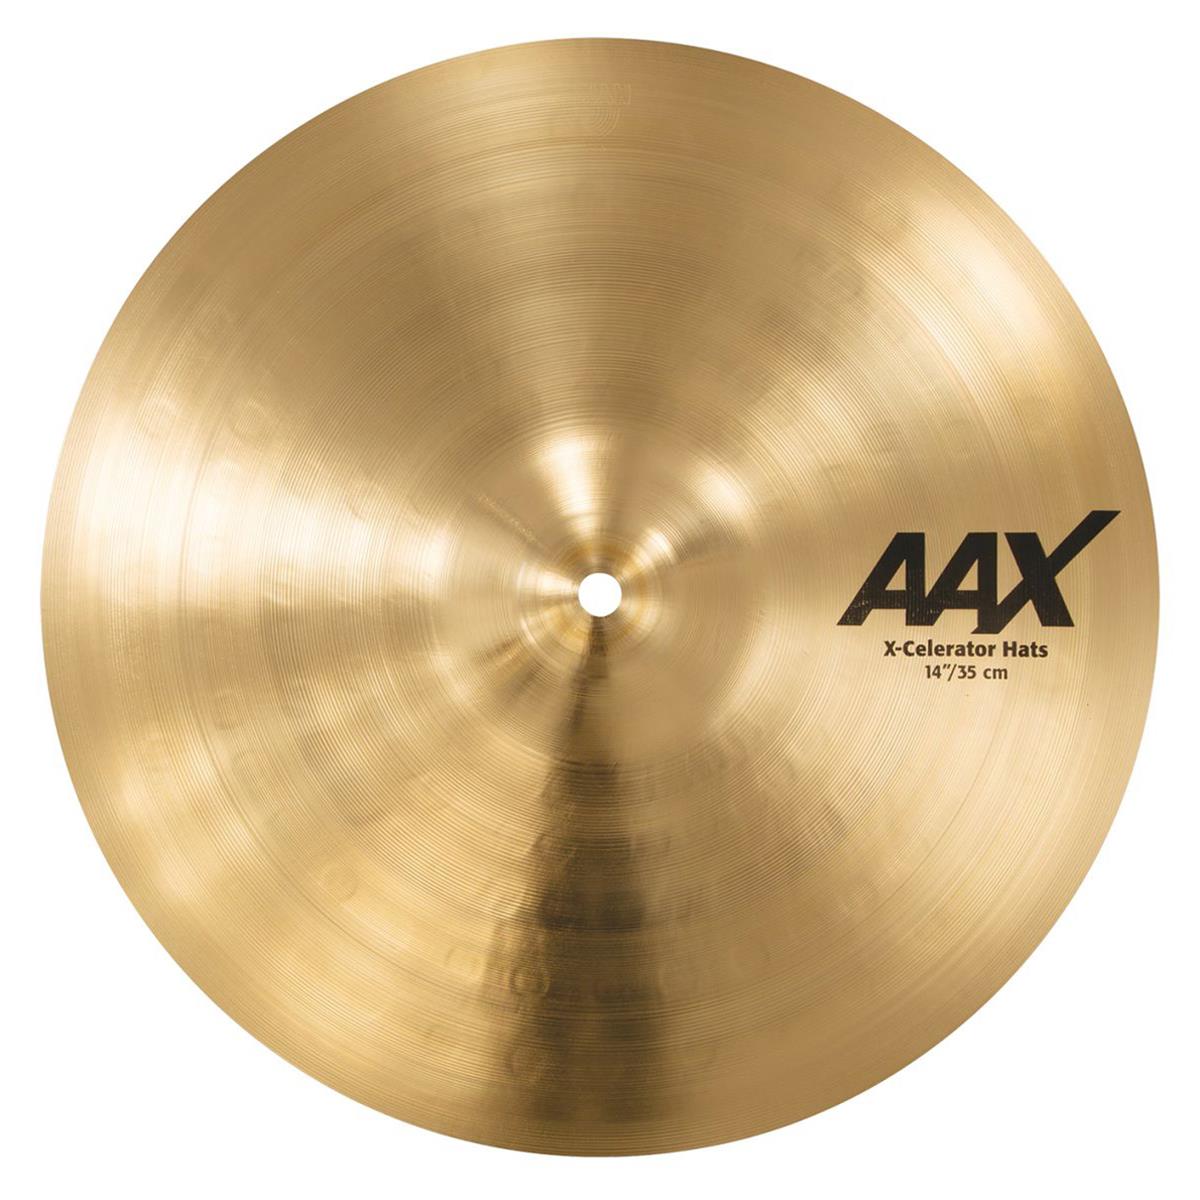 Sabian 14" AAX X-Celerator Hi-Hat Cymbals, Brilliant Finish, Pair With a rippled Air Wave bottom eliminating airlock and delivering super crisp and cutting stick sounds, Sabian 14" AAX X-Celerator Hi Hats cut through with exceptional clarity at all volumes. The Sabian AAX series delivers consistently bright, crisp, clear and cutting responses - AAX is the ultimate Modern Bright sound!